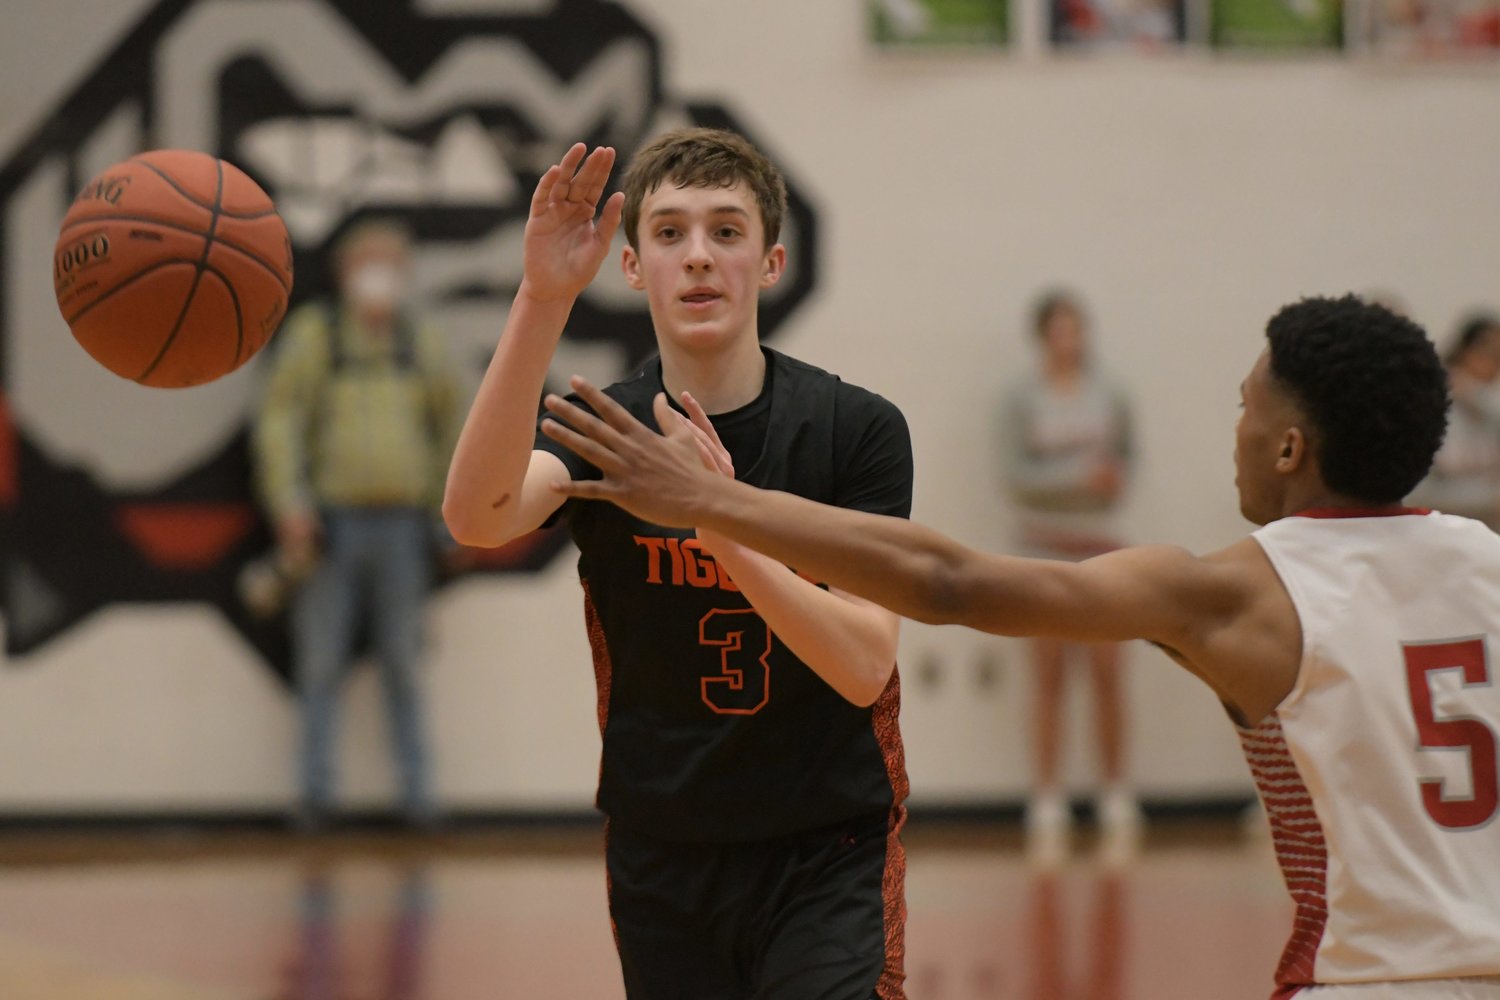 Action from Friday's Class 5 District 15 championship game between Kirksville and Mexico.